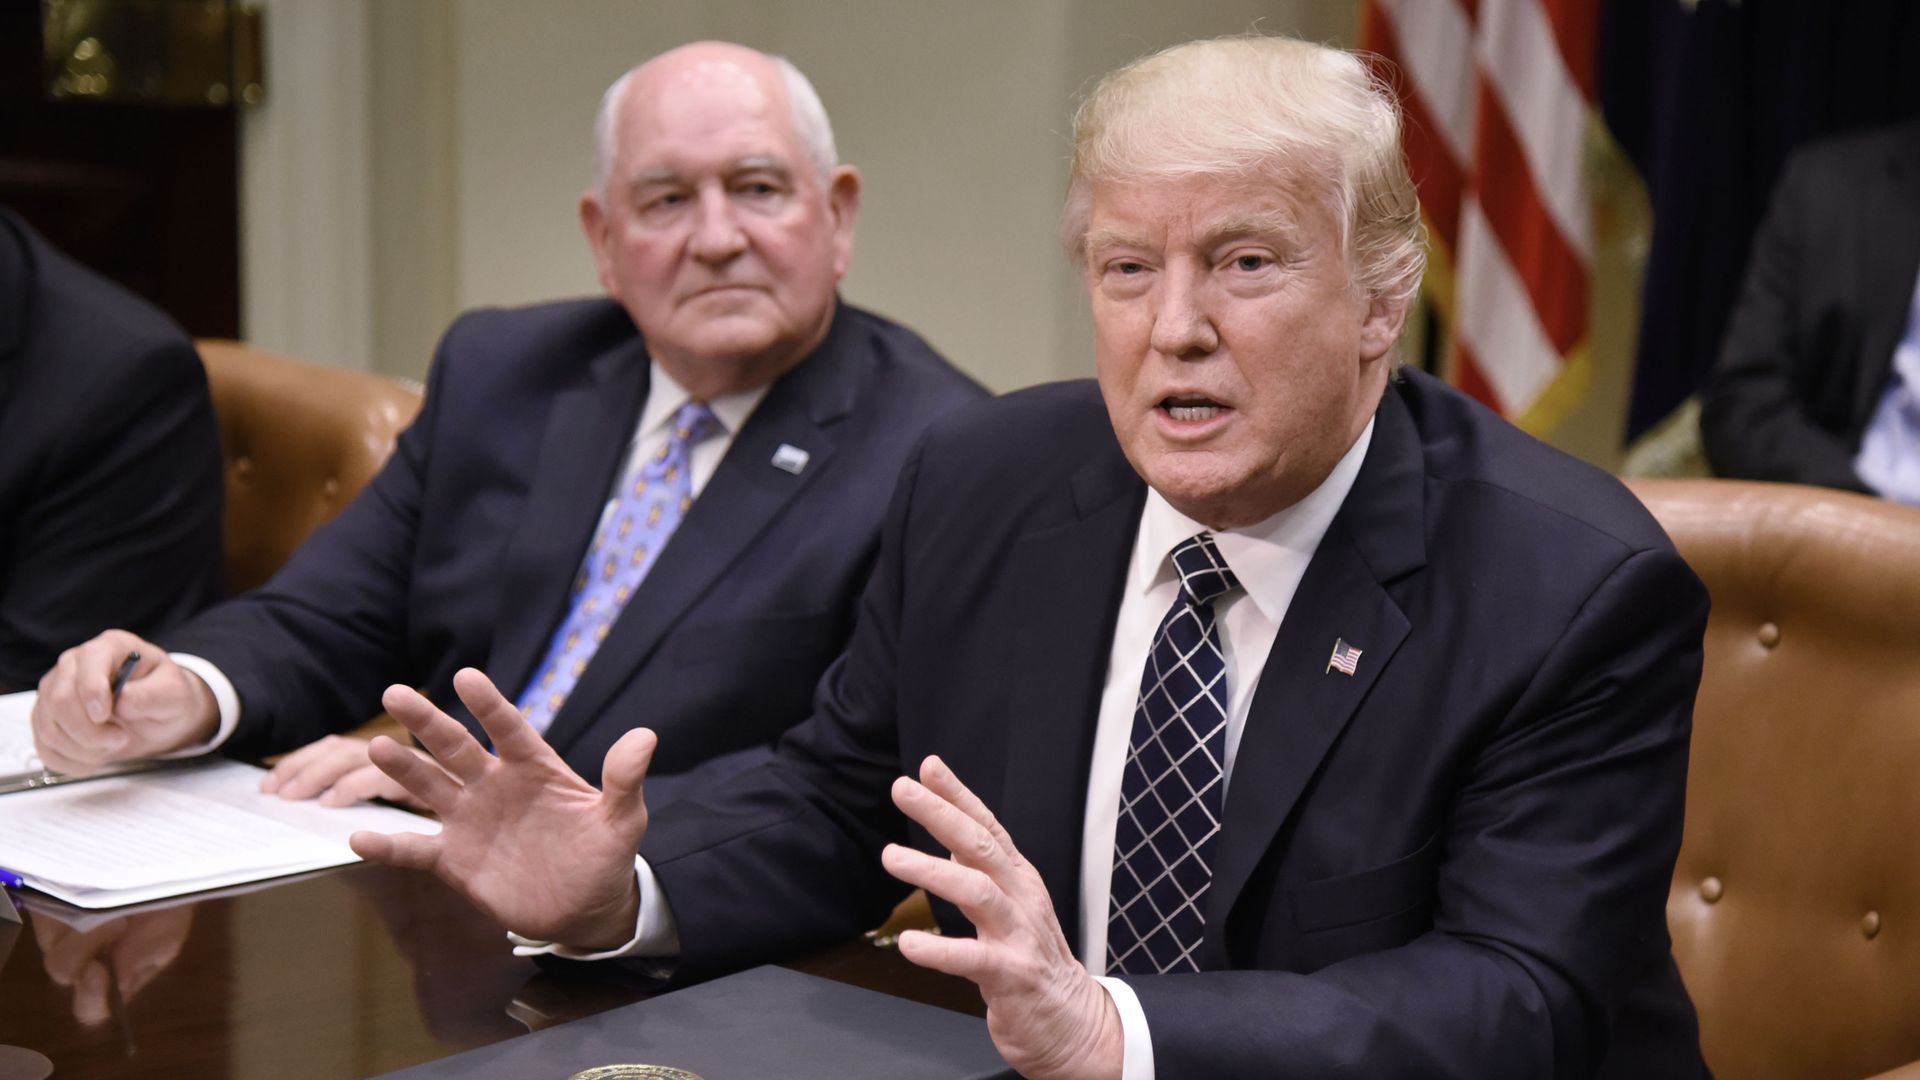 US President Donald speaks as Agriculture Secretary Sonny Perdue looks on during a roundtable.